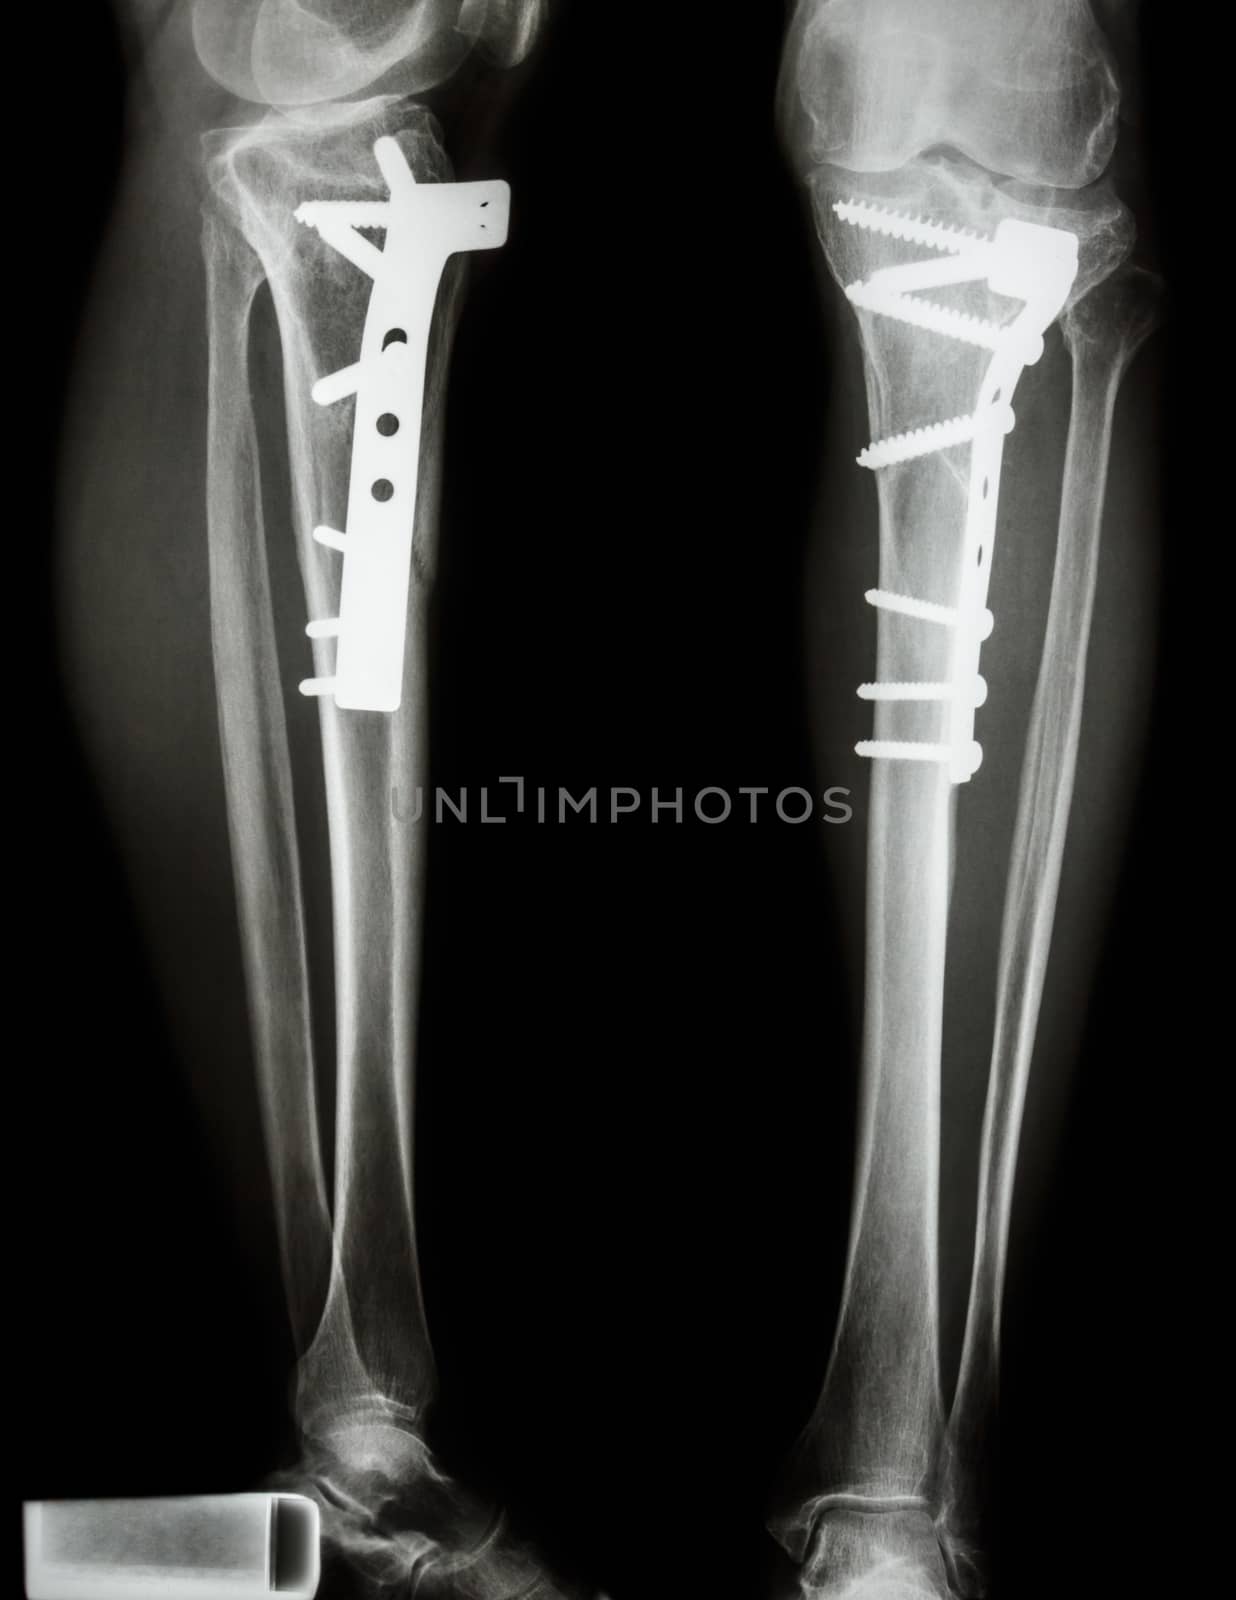 fracture tibia(leg bone). It was operated and internal fixed by plate&screw